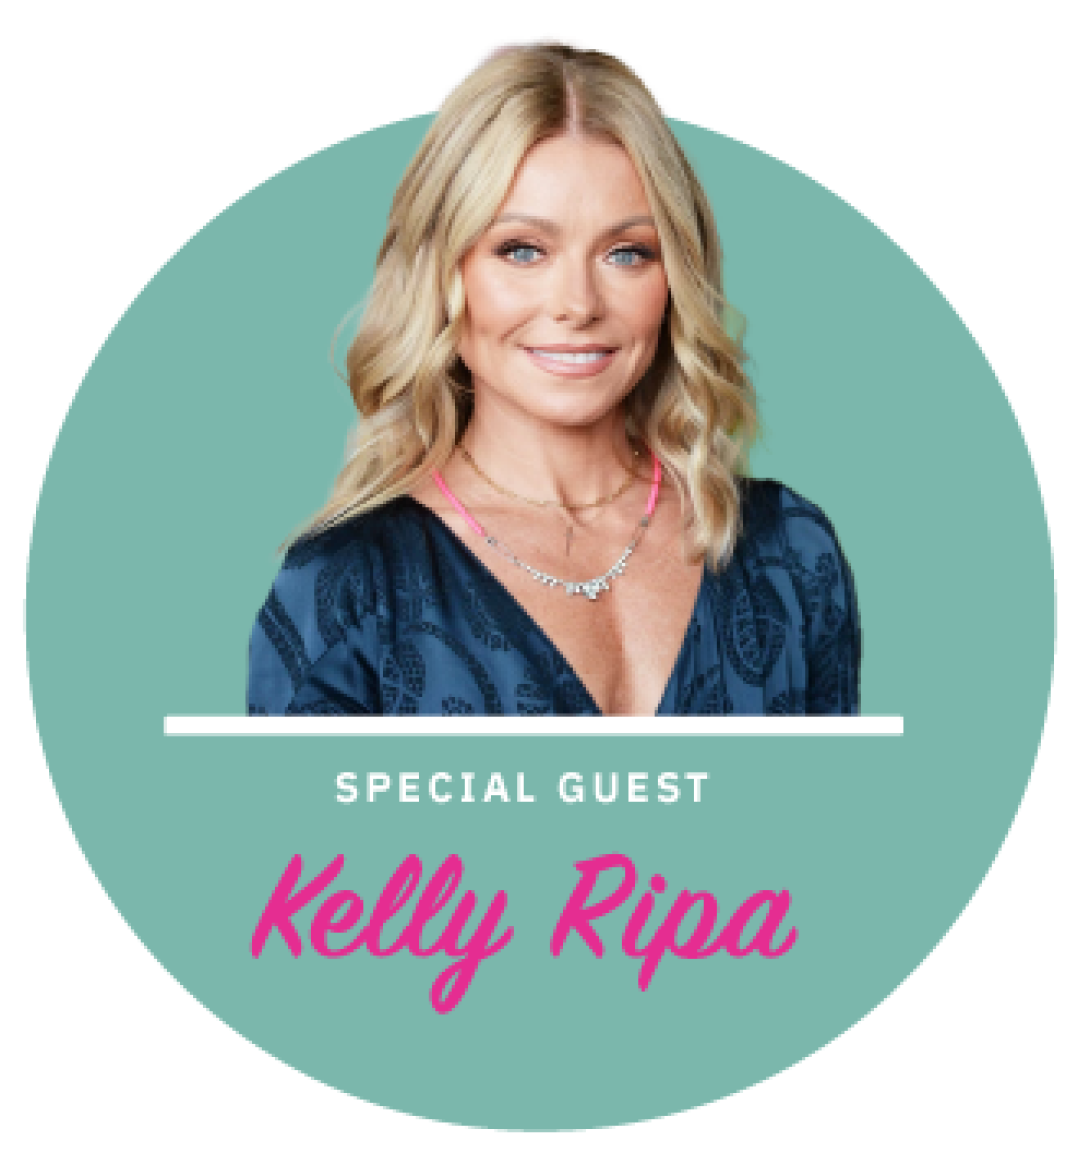 Special Guest Kelly Ripa